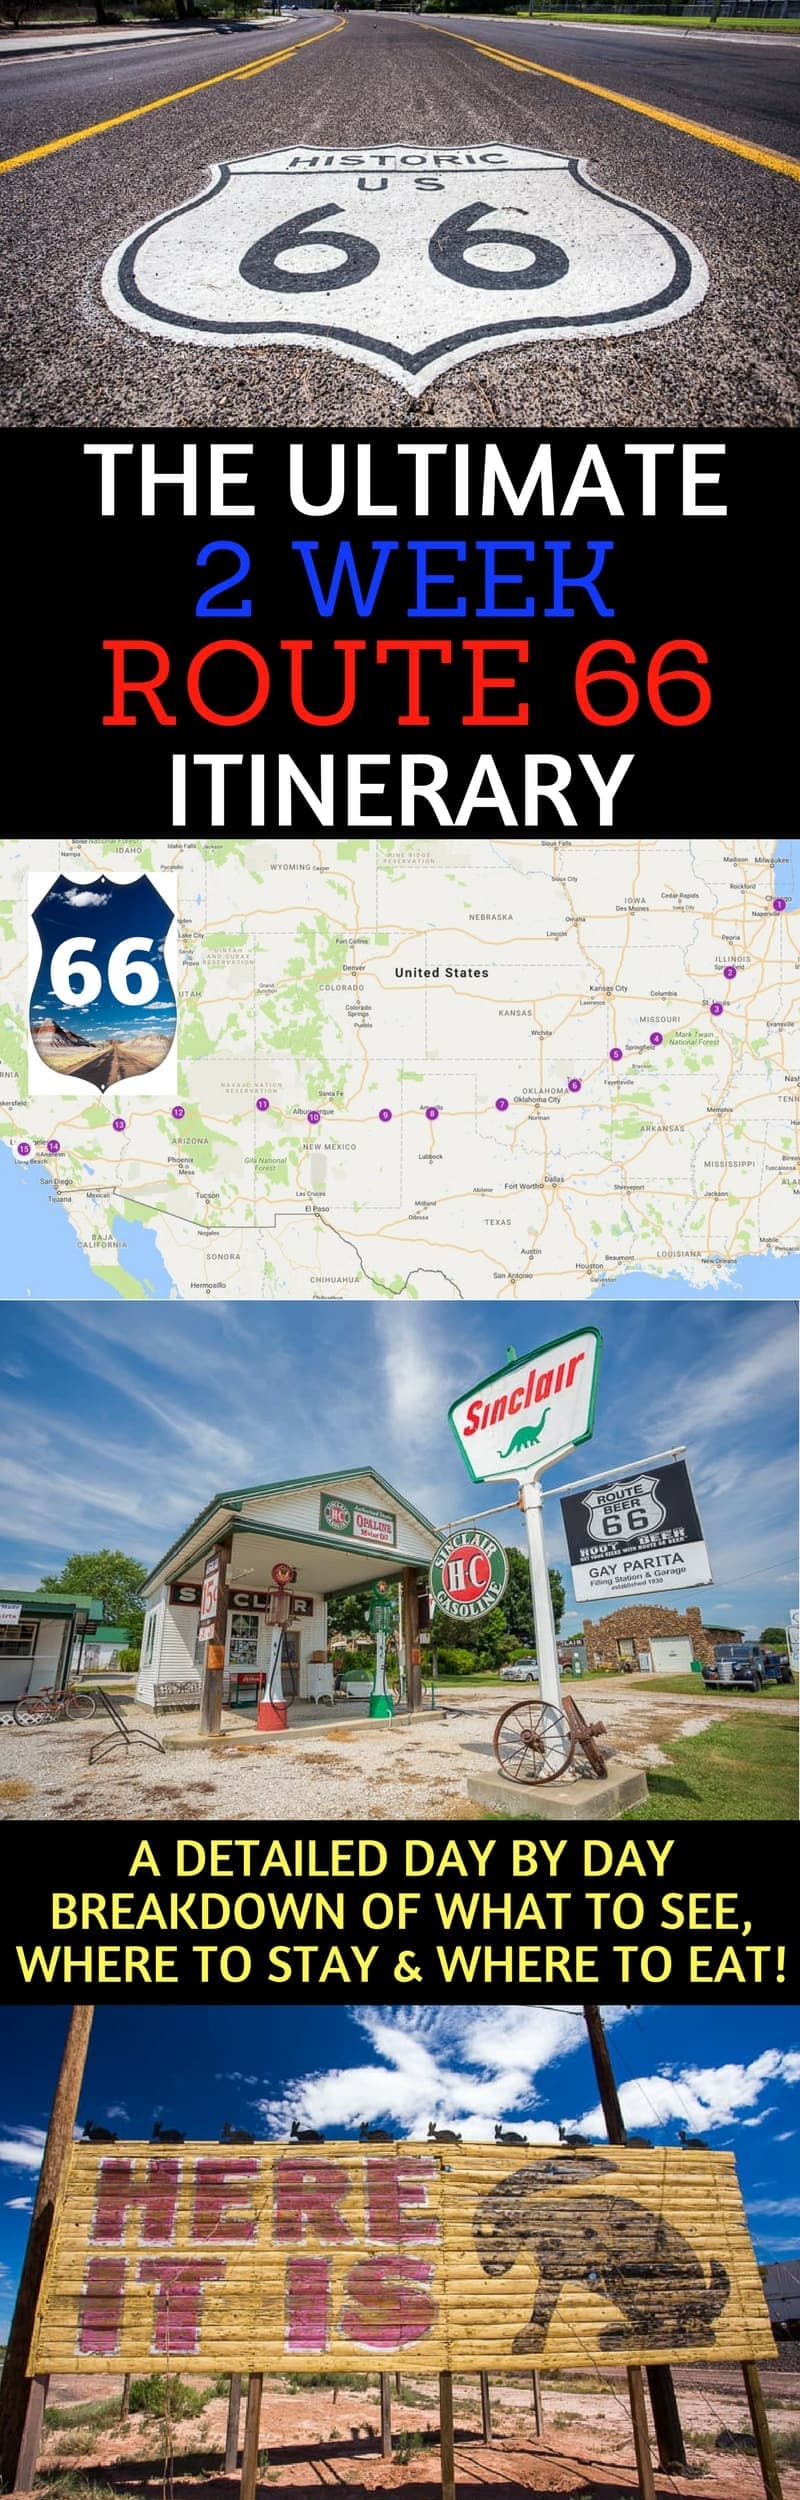 Route 66 is the ultimate American road trip & this comprehensive 2 week Route 66 itinerary will help get the most out of your Route 66 road trip. The detailed day-by-day Route 66 itinerary covers all the basic details (e.g., mileage) and sightseeing highlights along the route. We provide suggestions for attractions to visit, where to eat, and where to stay each day. Use this Route 66 itinerary to drive from #Chicago to Los Angeles! #Route66 #Route66itinerary #MotherRoad #roadtrip #USAroadtrip